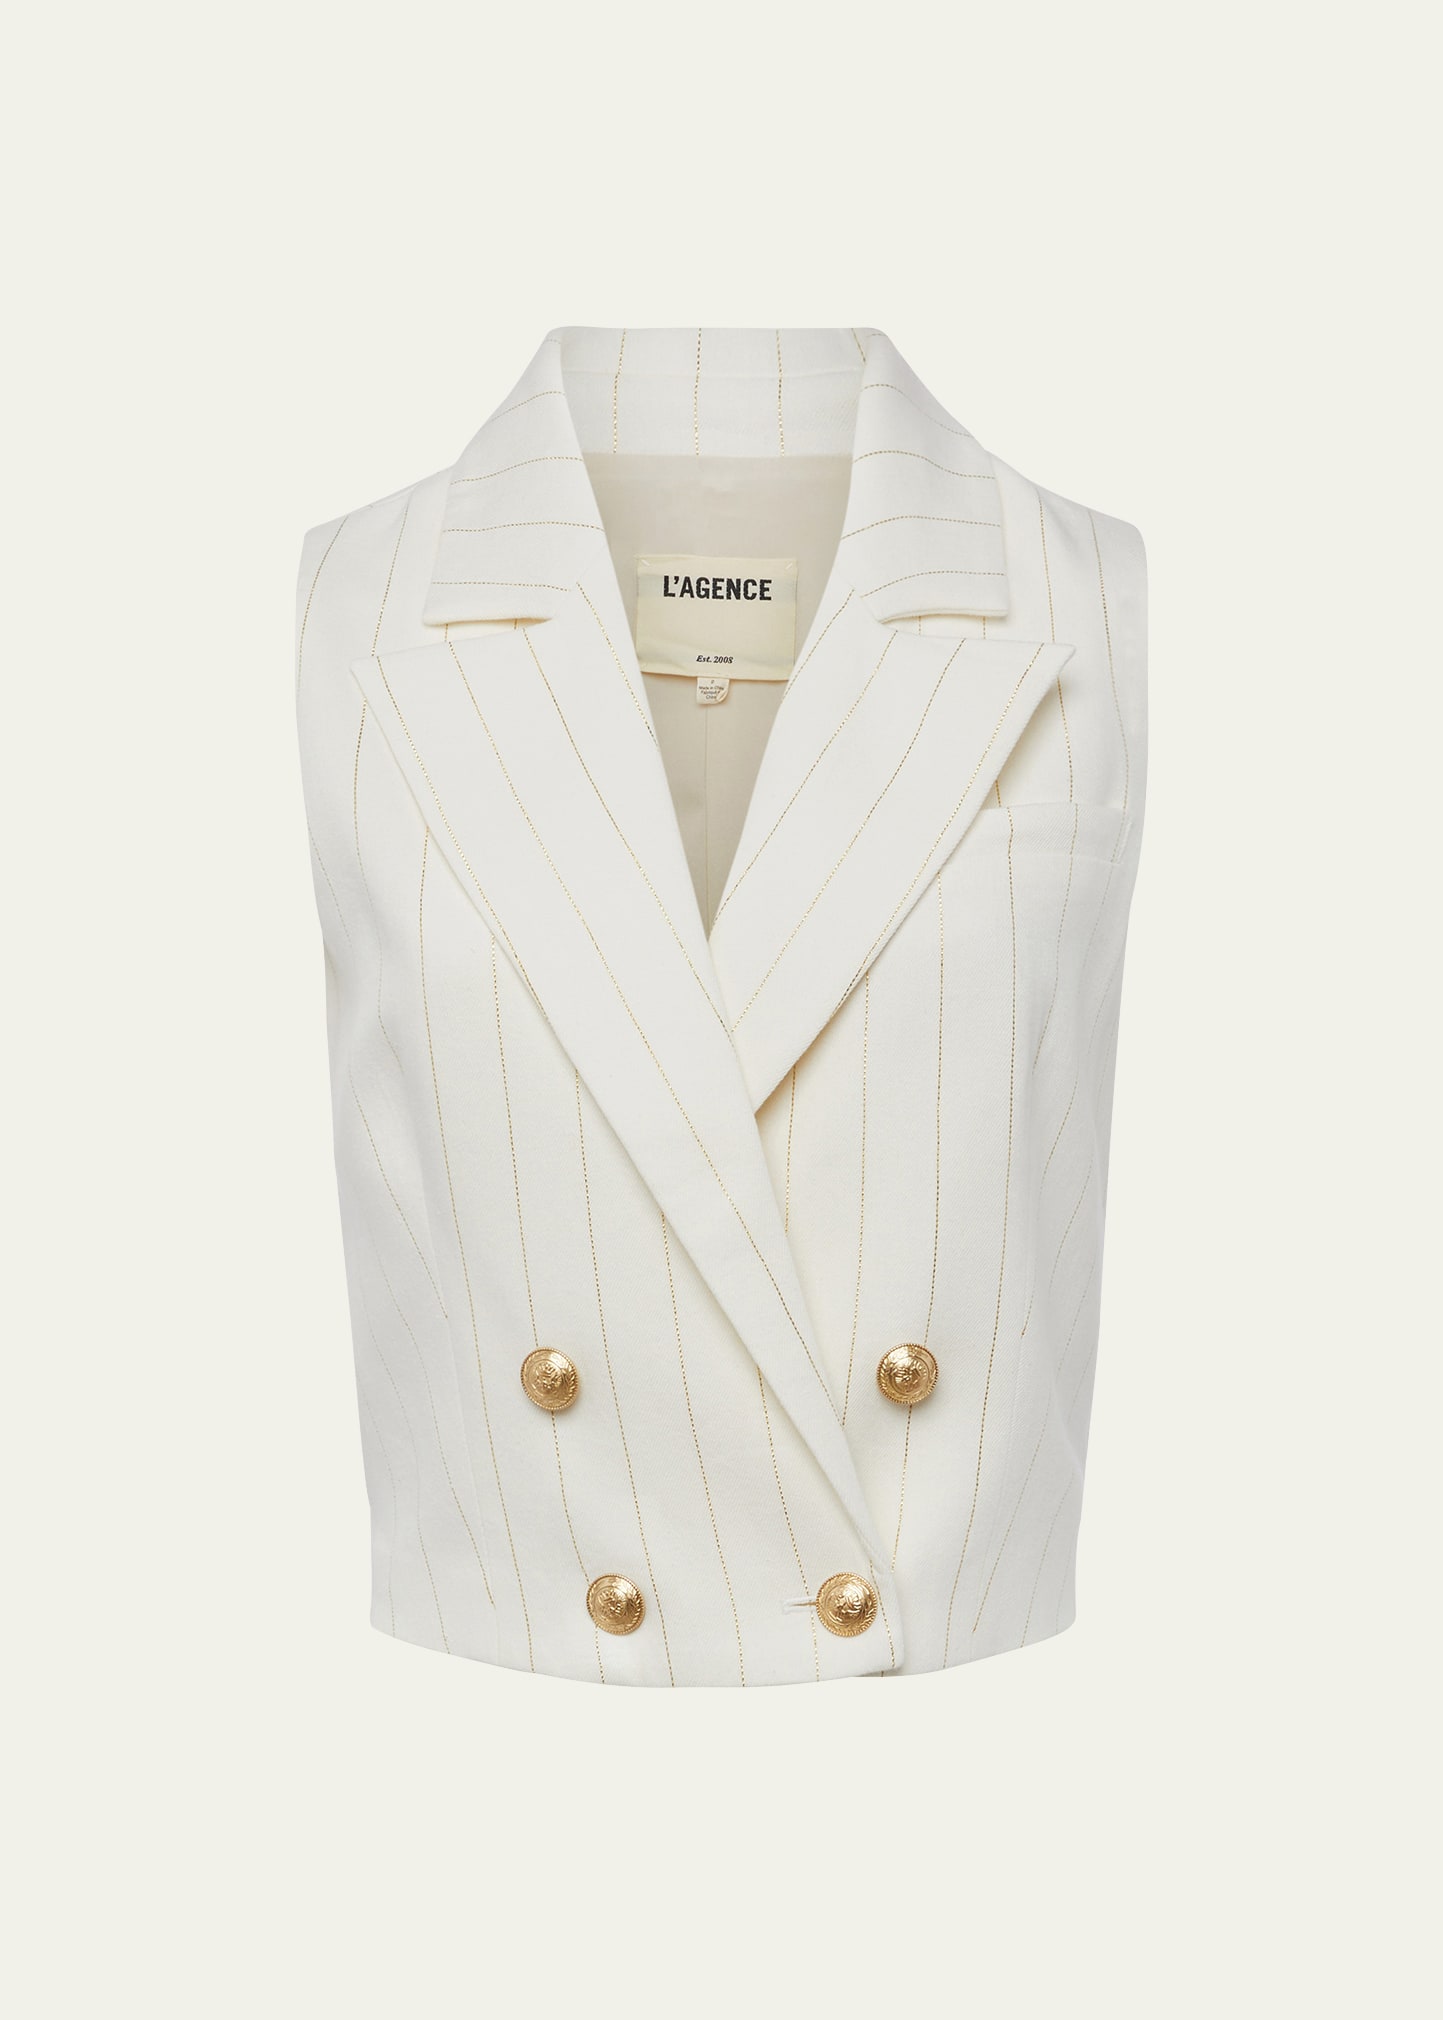 L'Agence Fable Double-Breasted Vest | Bergdorf Goodman